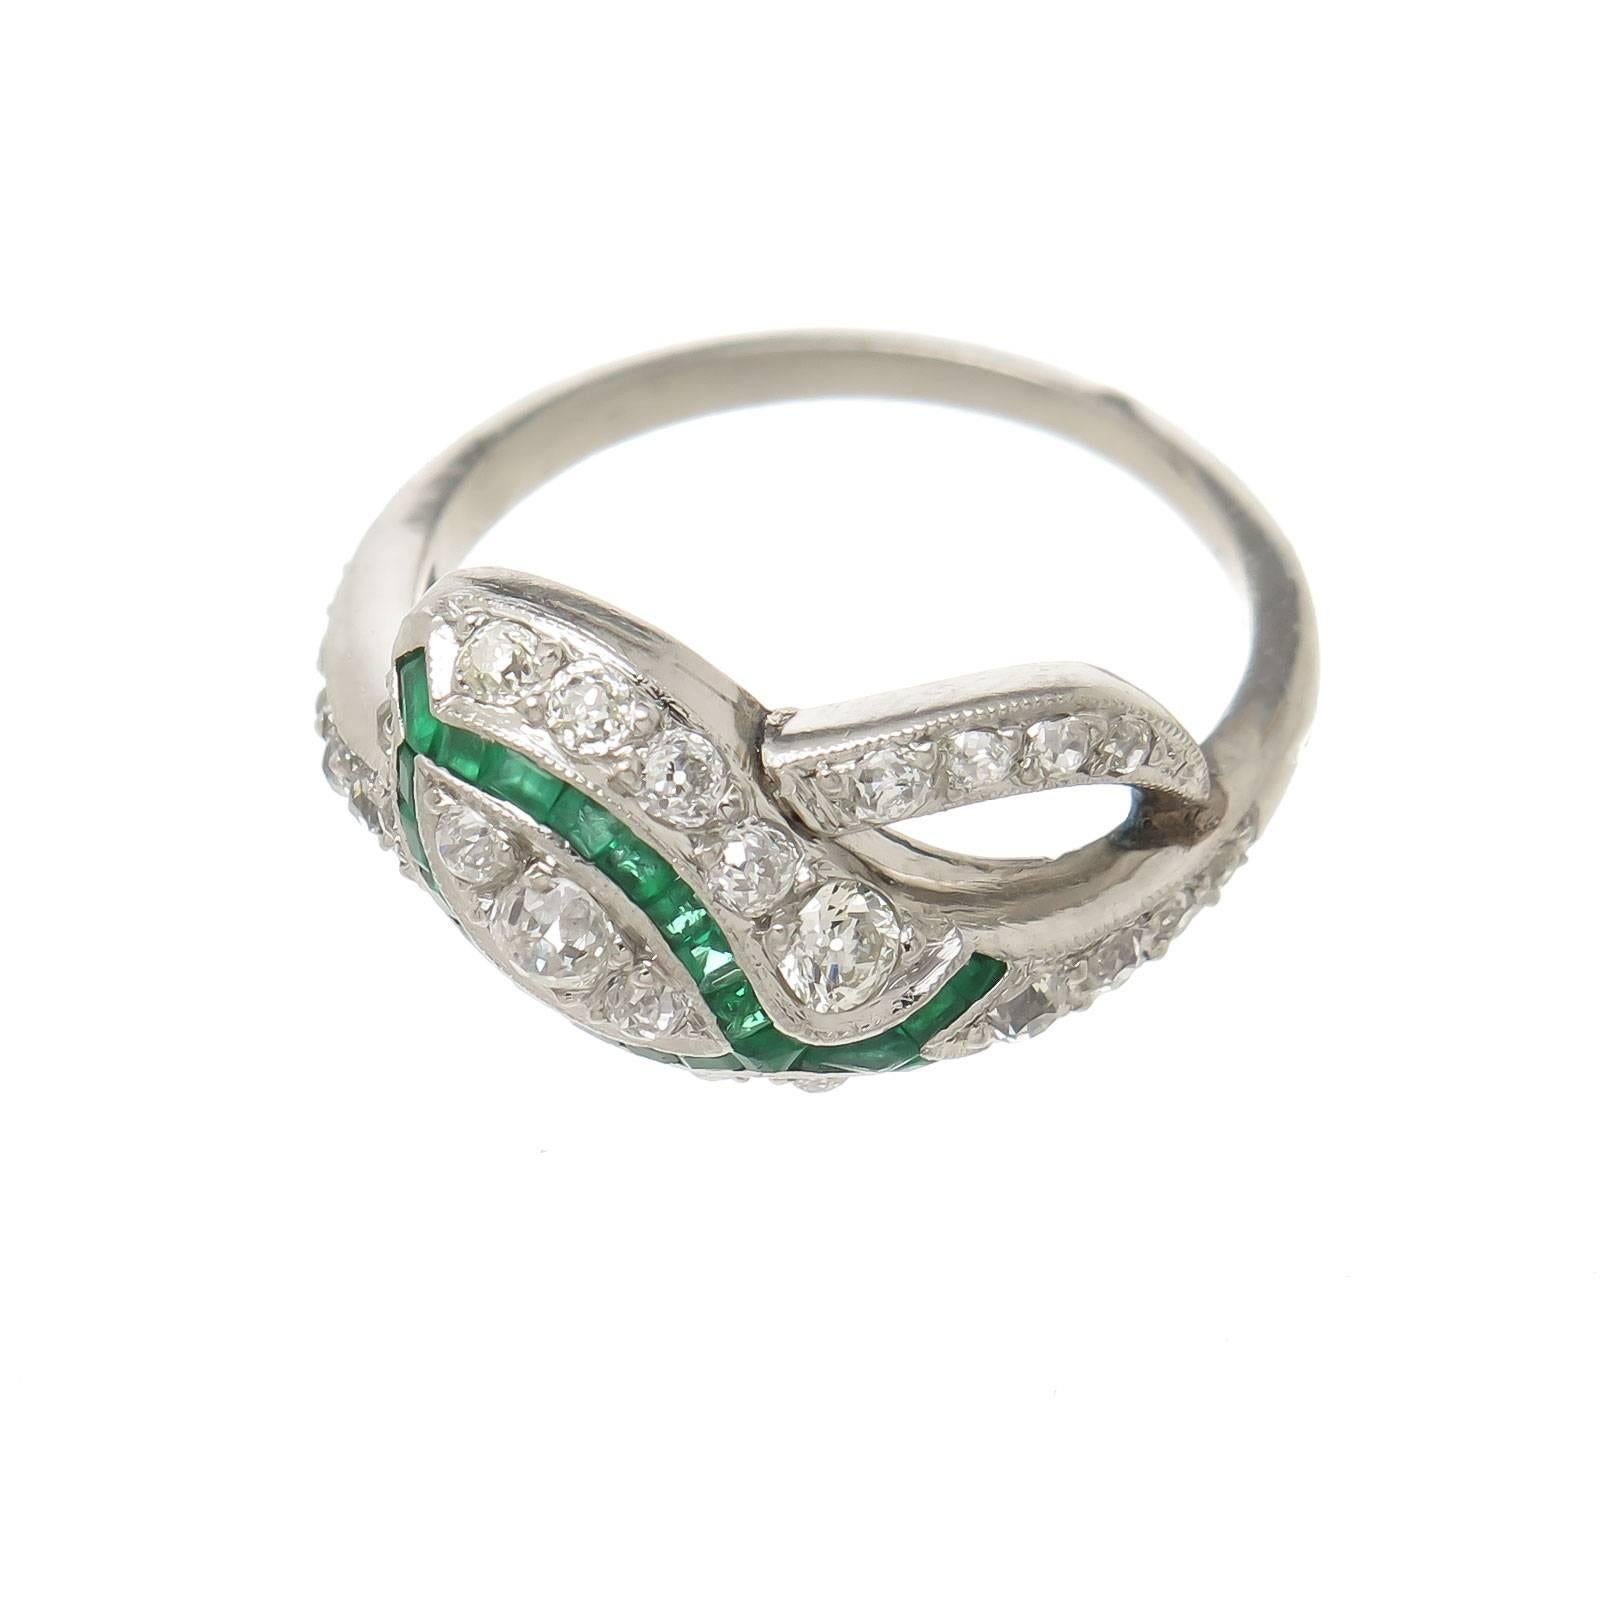 Circa 1930s Platinum Snake form ring,  measuring 3/4 inch across the top and set with old Mine cut Diamonds that are white and clean and total 1 carat, further set with square and fancy cut Emeralds of very nice Color. The inside of the shank having